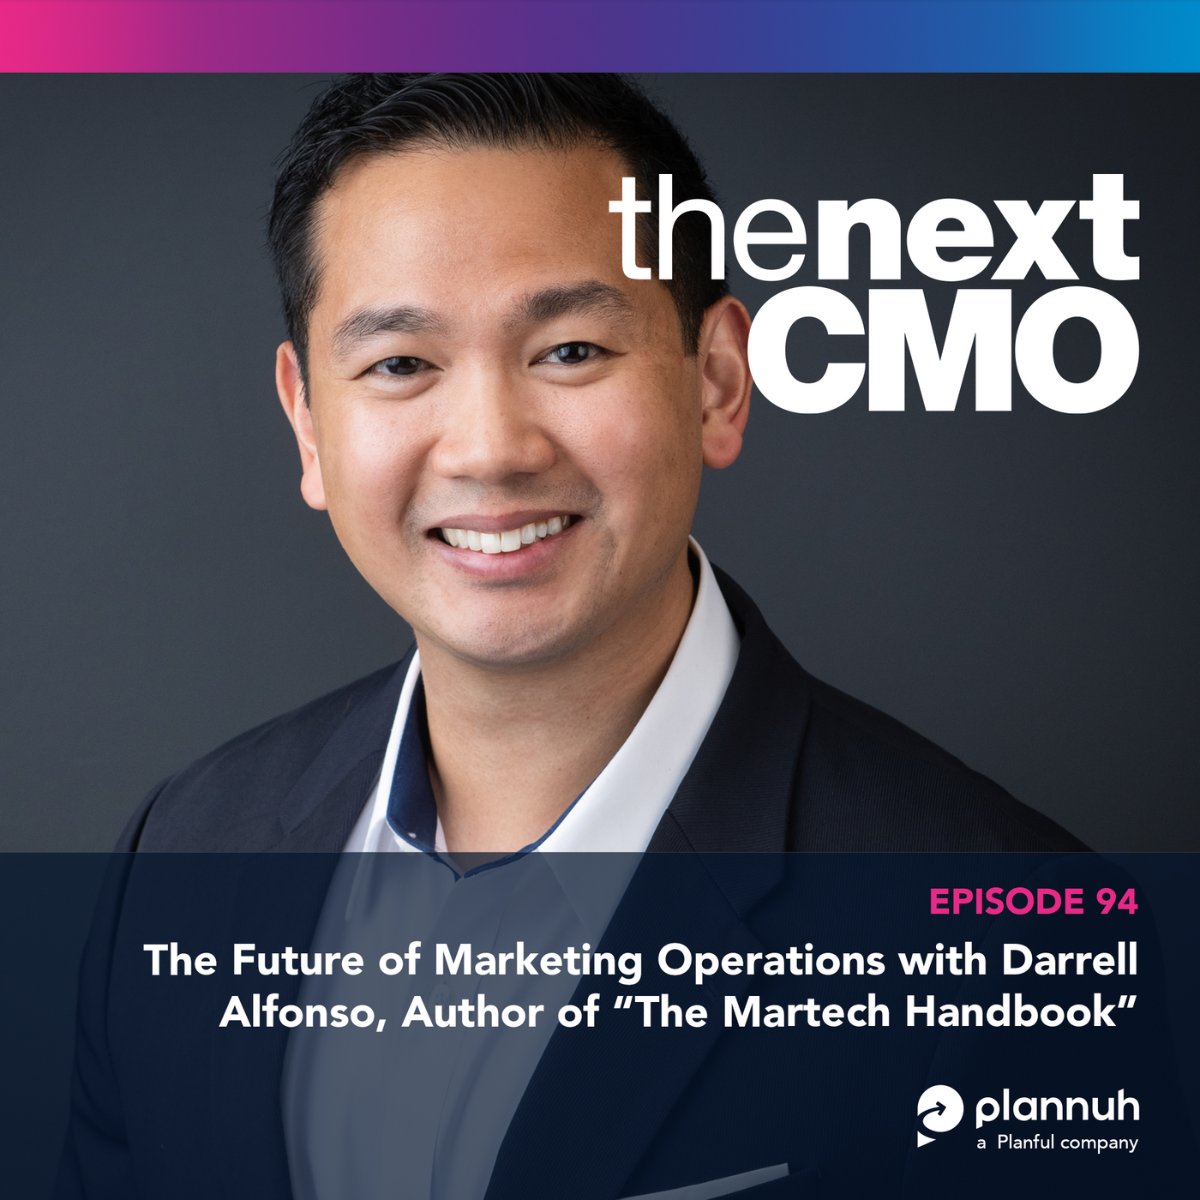 In this weeks episode of @thenextCMO, @nerdCMO speaks with @DemandDarrell, the head of marketings ops and strategy at @Indeed

The Future of #MarketingOperations with Darrell Alfonso, Author of “The Martech Handbook” hubs.ly/Q01z39zy0